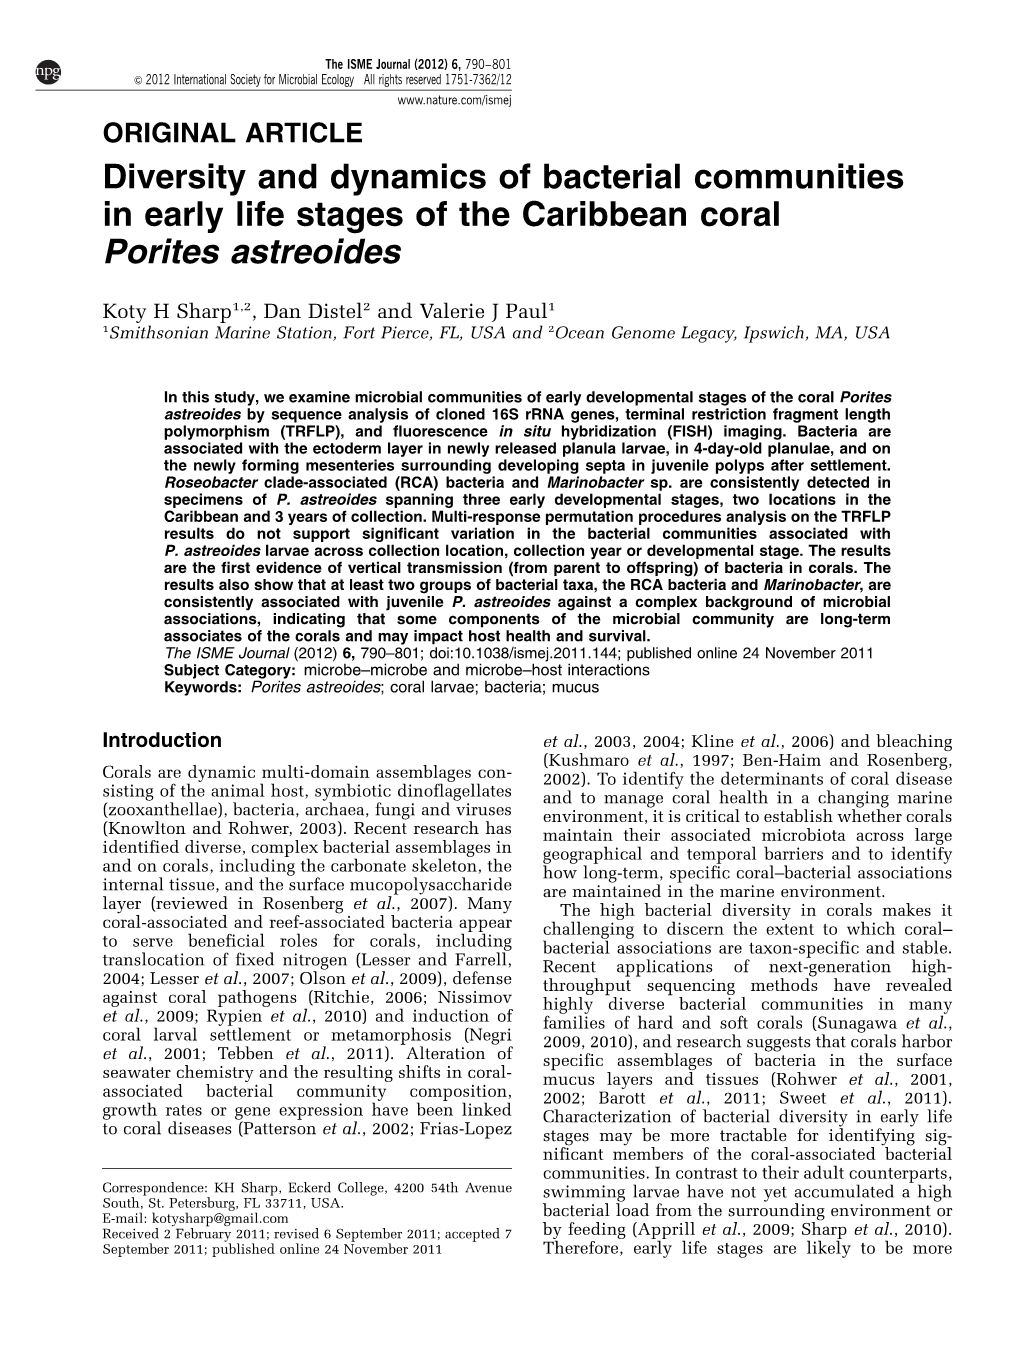 Diversity and Dynamics of Bacterial Communities in Early Life Stages of the Caribbean Coral Porites Astreoides